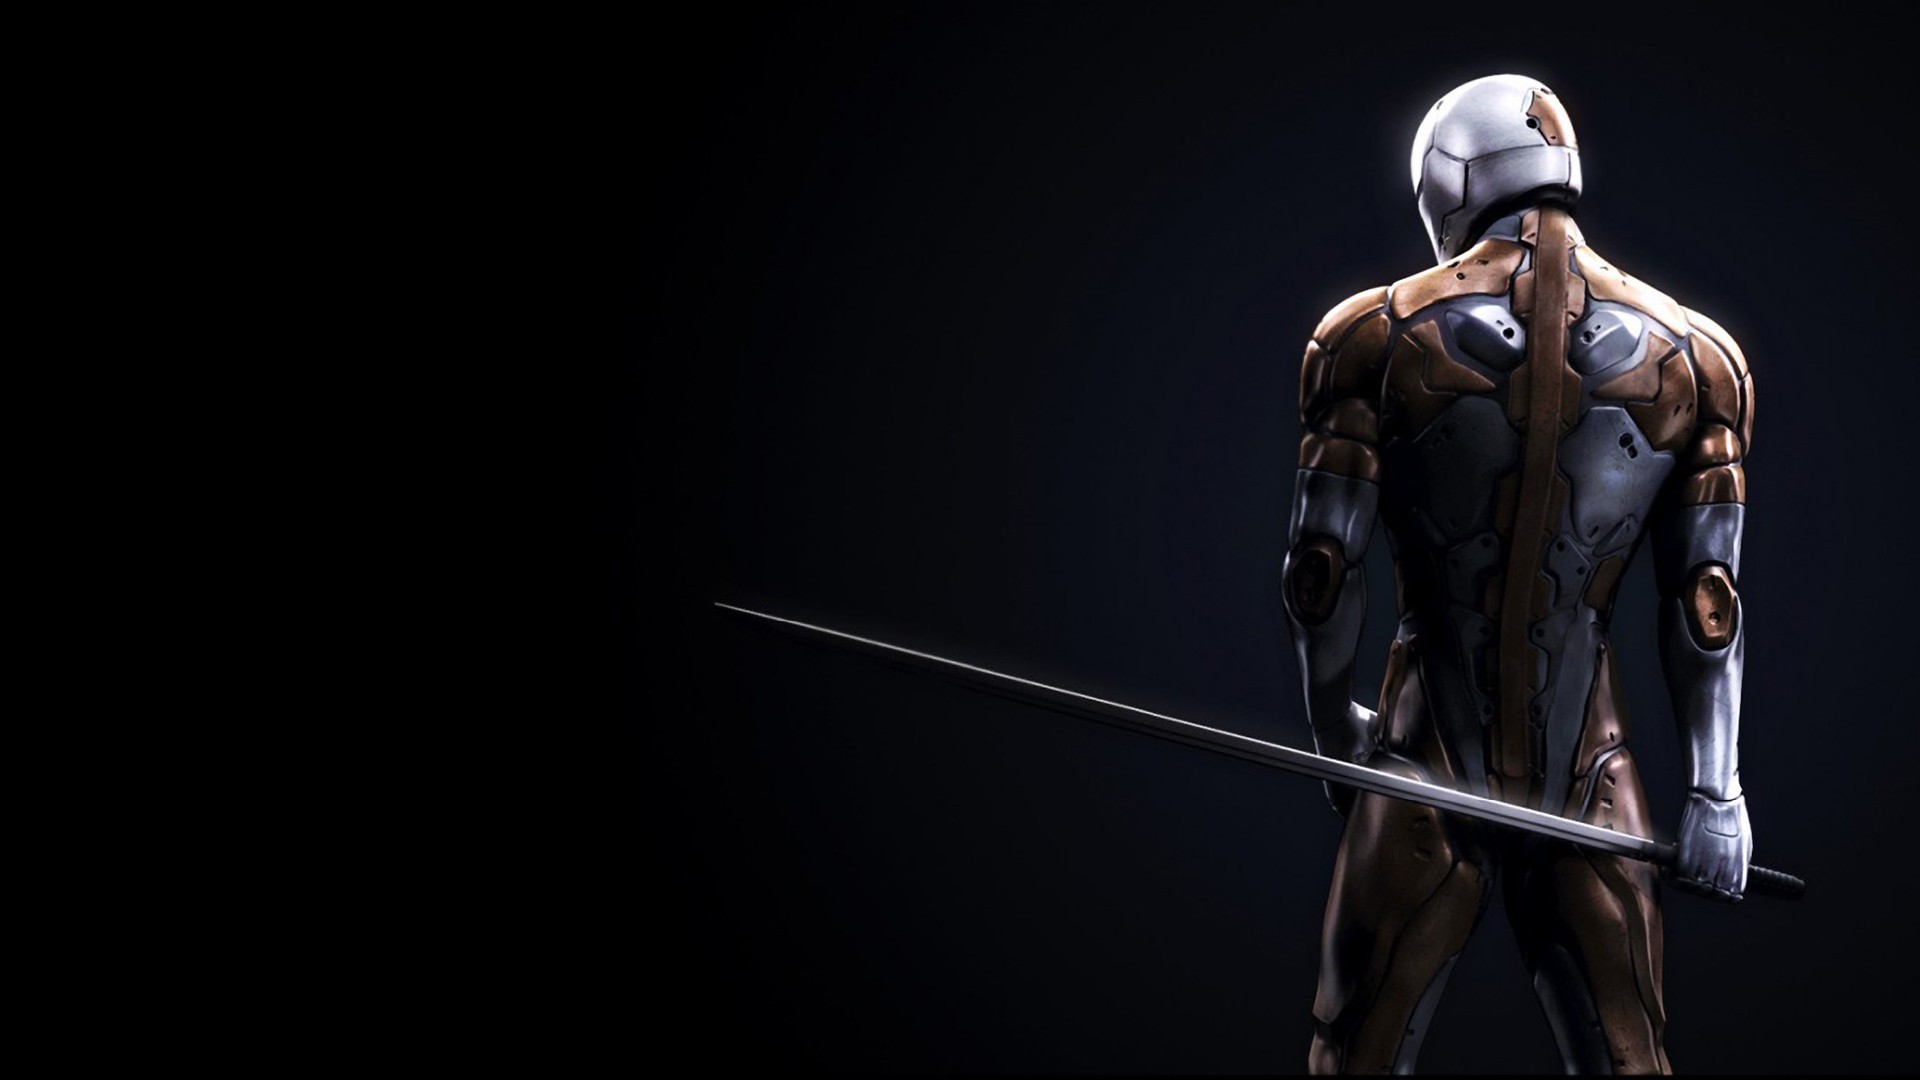 Gray Fox Character Metal Gear Solid Wallpapers Hd Desktop And Mobile Backgrounds